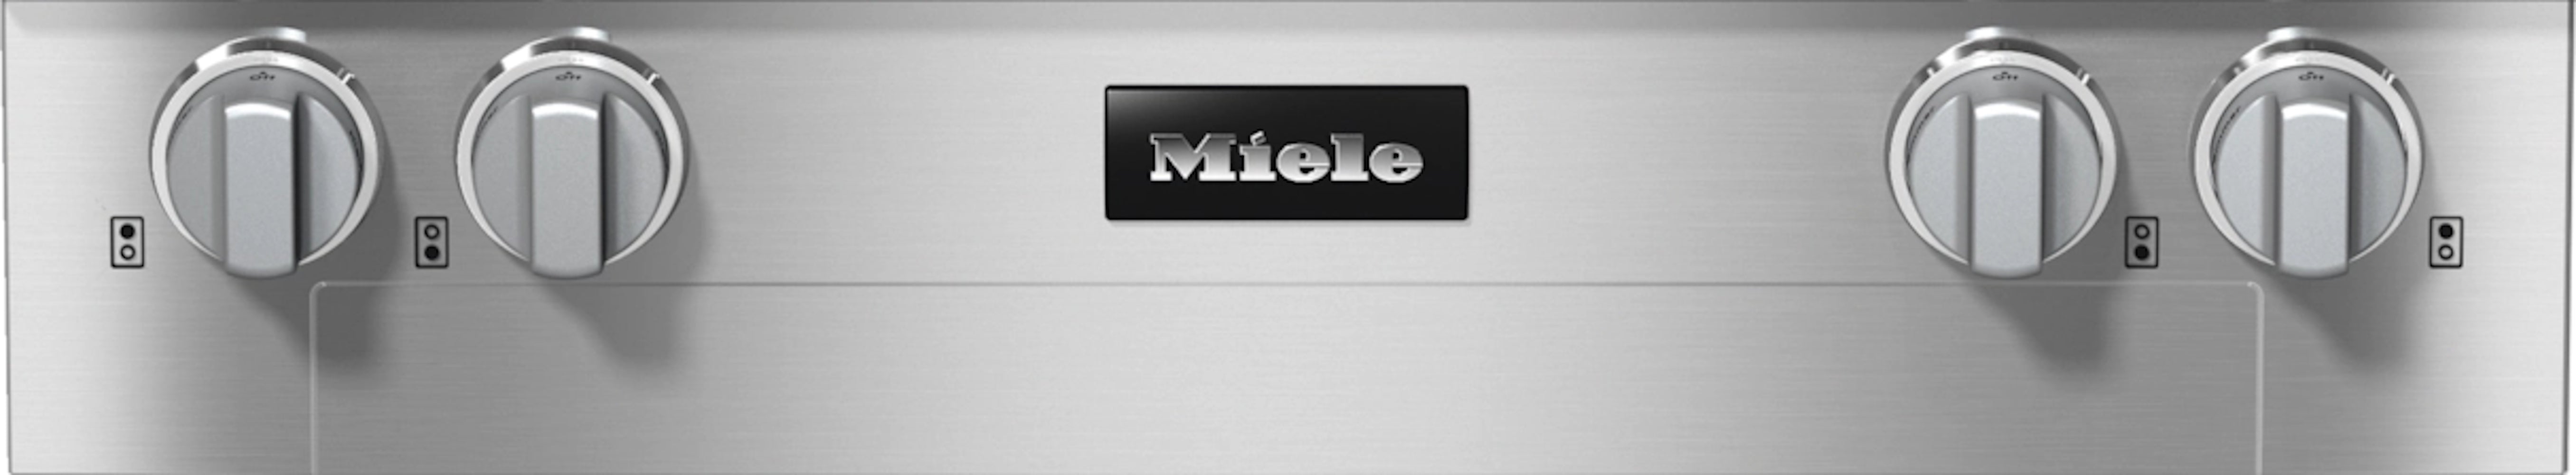 Miele - 30 Inch Gas Cooktop in Stainless - KMR 1124-3 LP